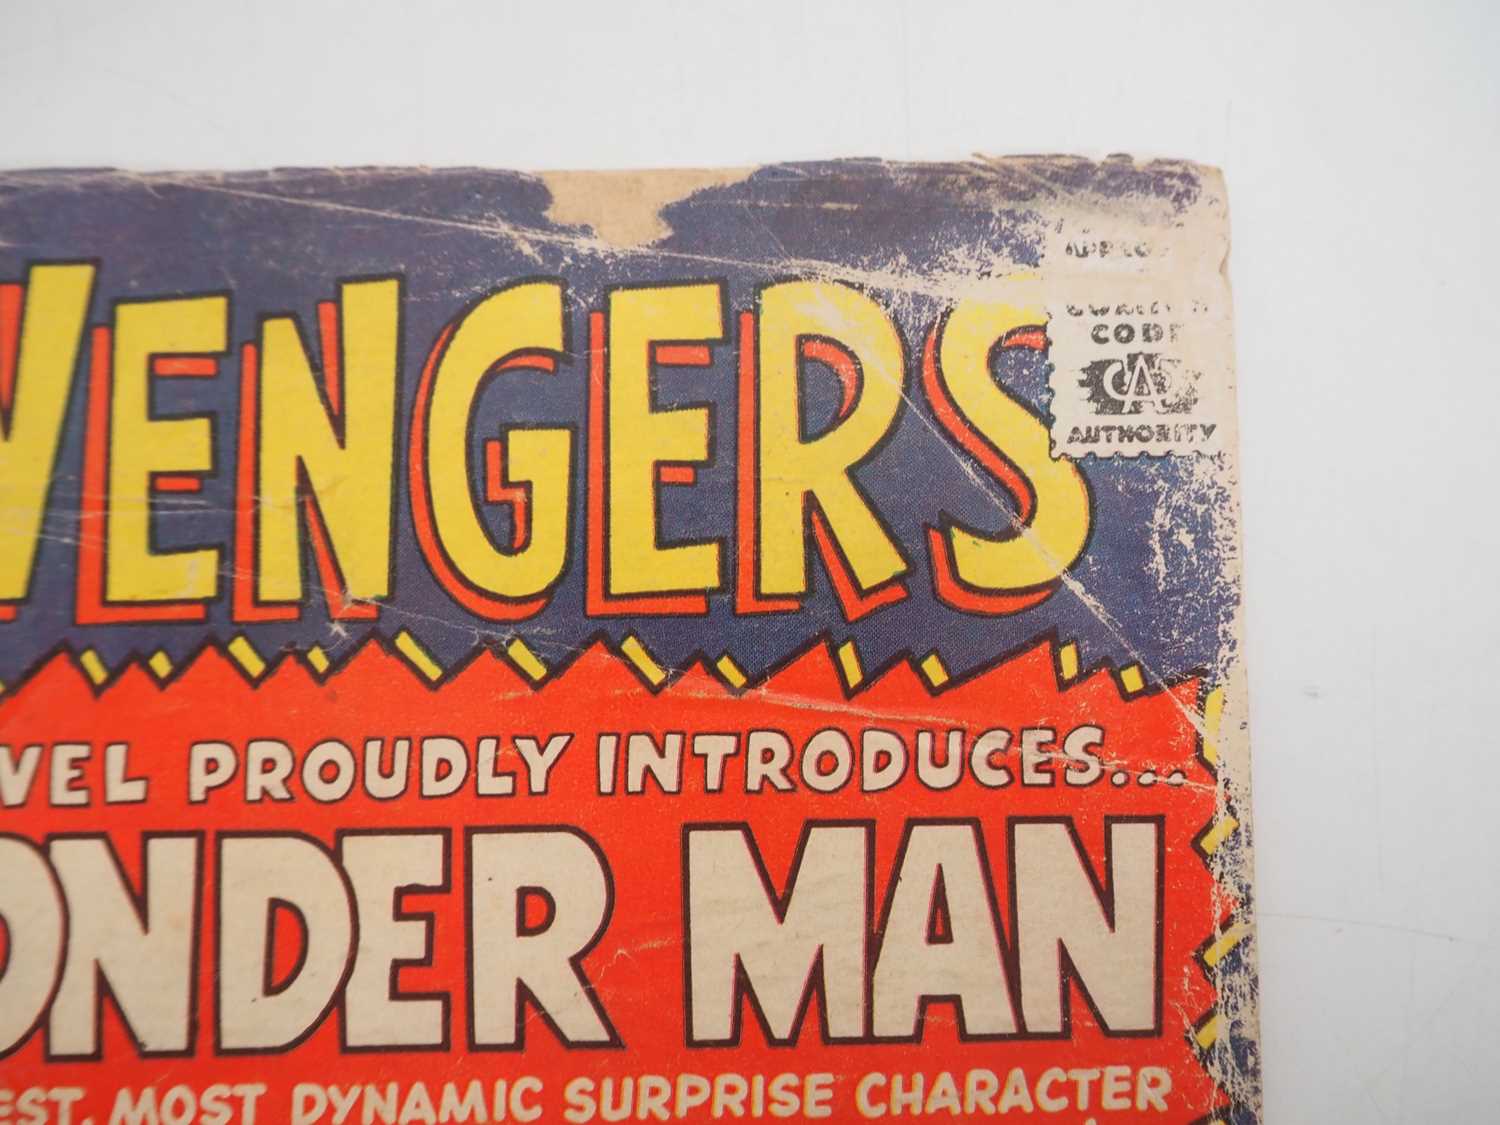 AVENGERS #9 (1964 - MARVEL) - The first appearance and 'death' of Wonder Man - Cover art Jack - Image 3 of 17